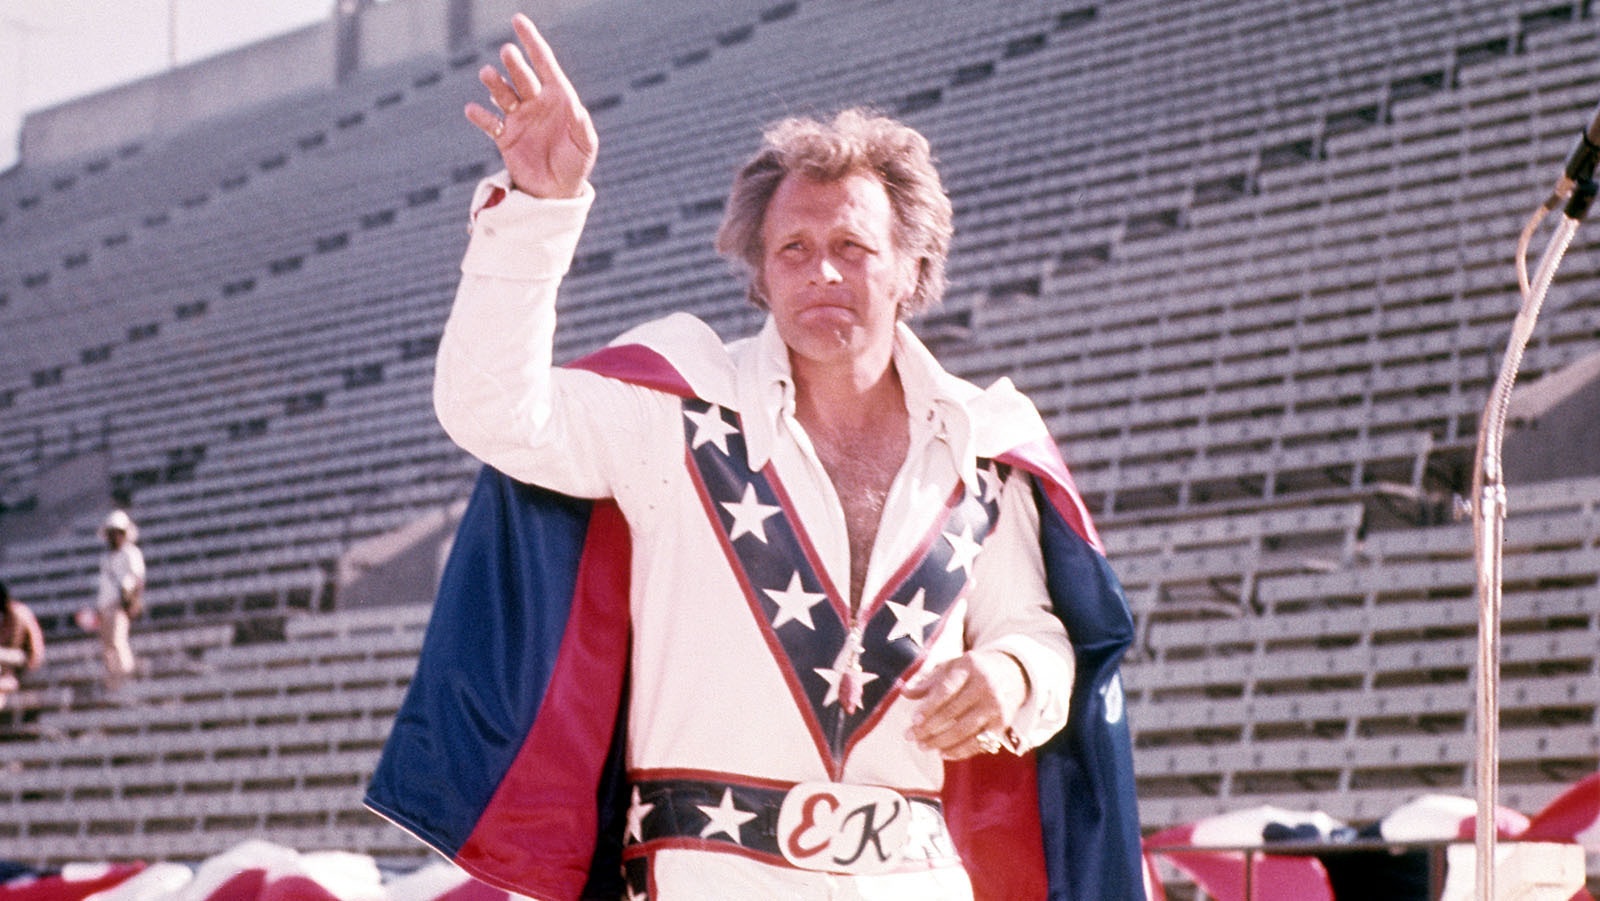 Evel Knievel pushed the boundaries on many levels as America's first bad boy daredevil.